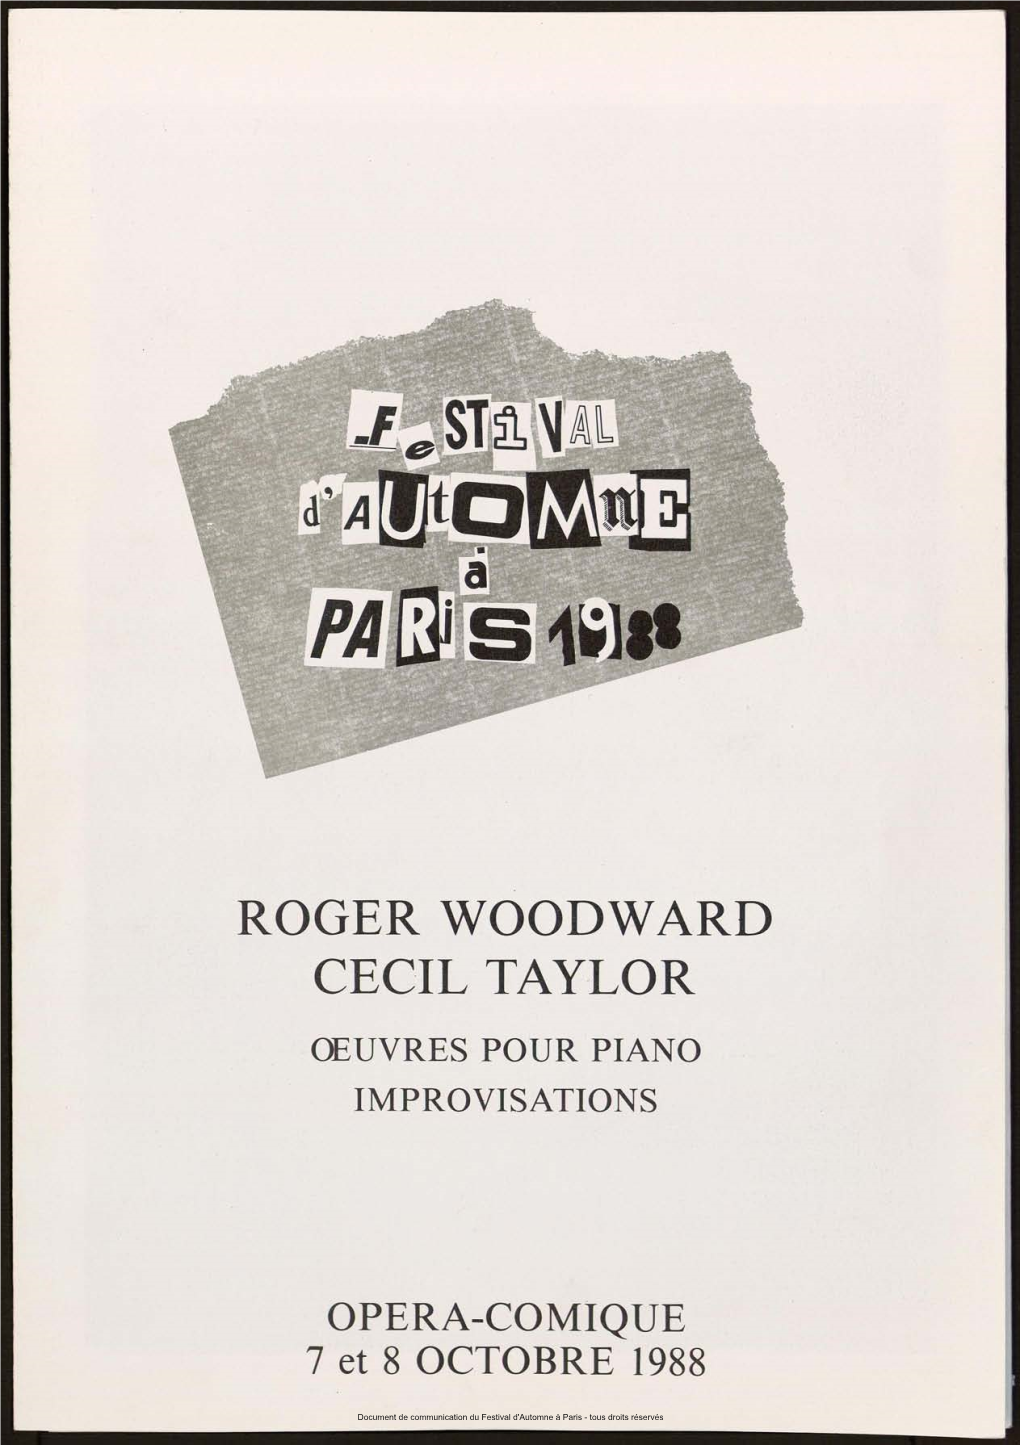 Roger Woodward Cecil Taylor Oeuvres Pour Piano Improvisations